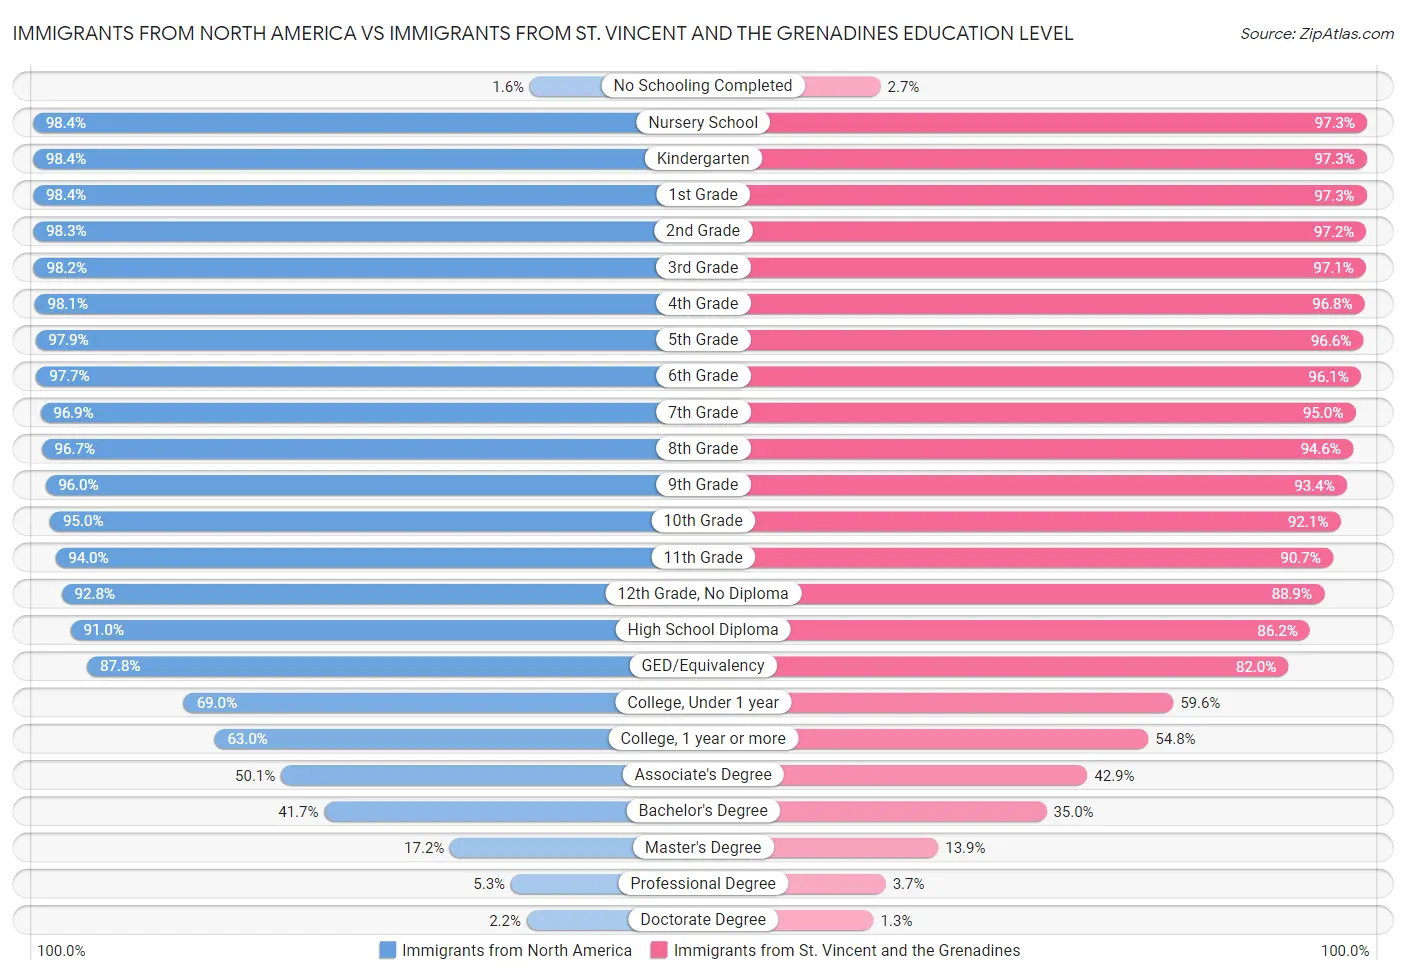 Immigrants from North America vs Immigrants from St. Vincent and the Grenadines Education Level